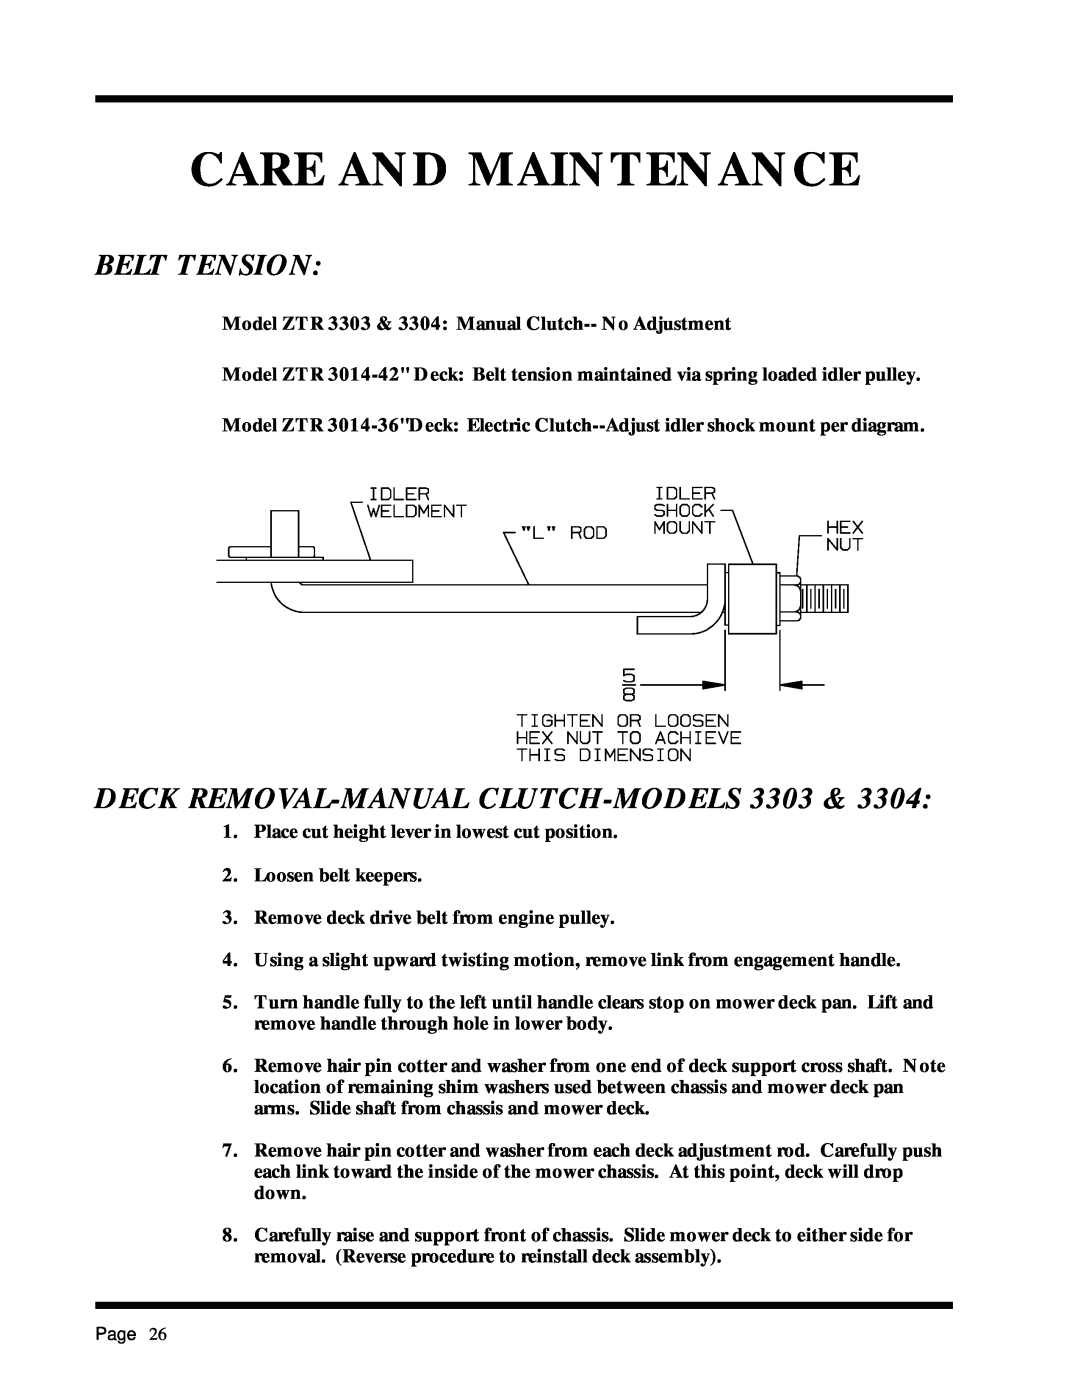 Dixon 6025 manual Belt Tension, DECK REMOVAL-MANUAL CLUTCH-MODELS3303, Care And Maintenance 